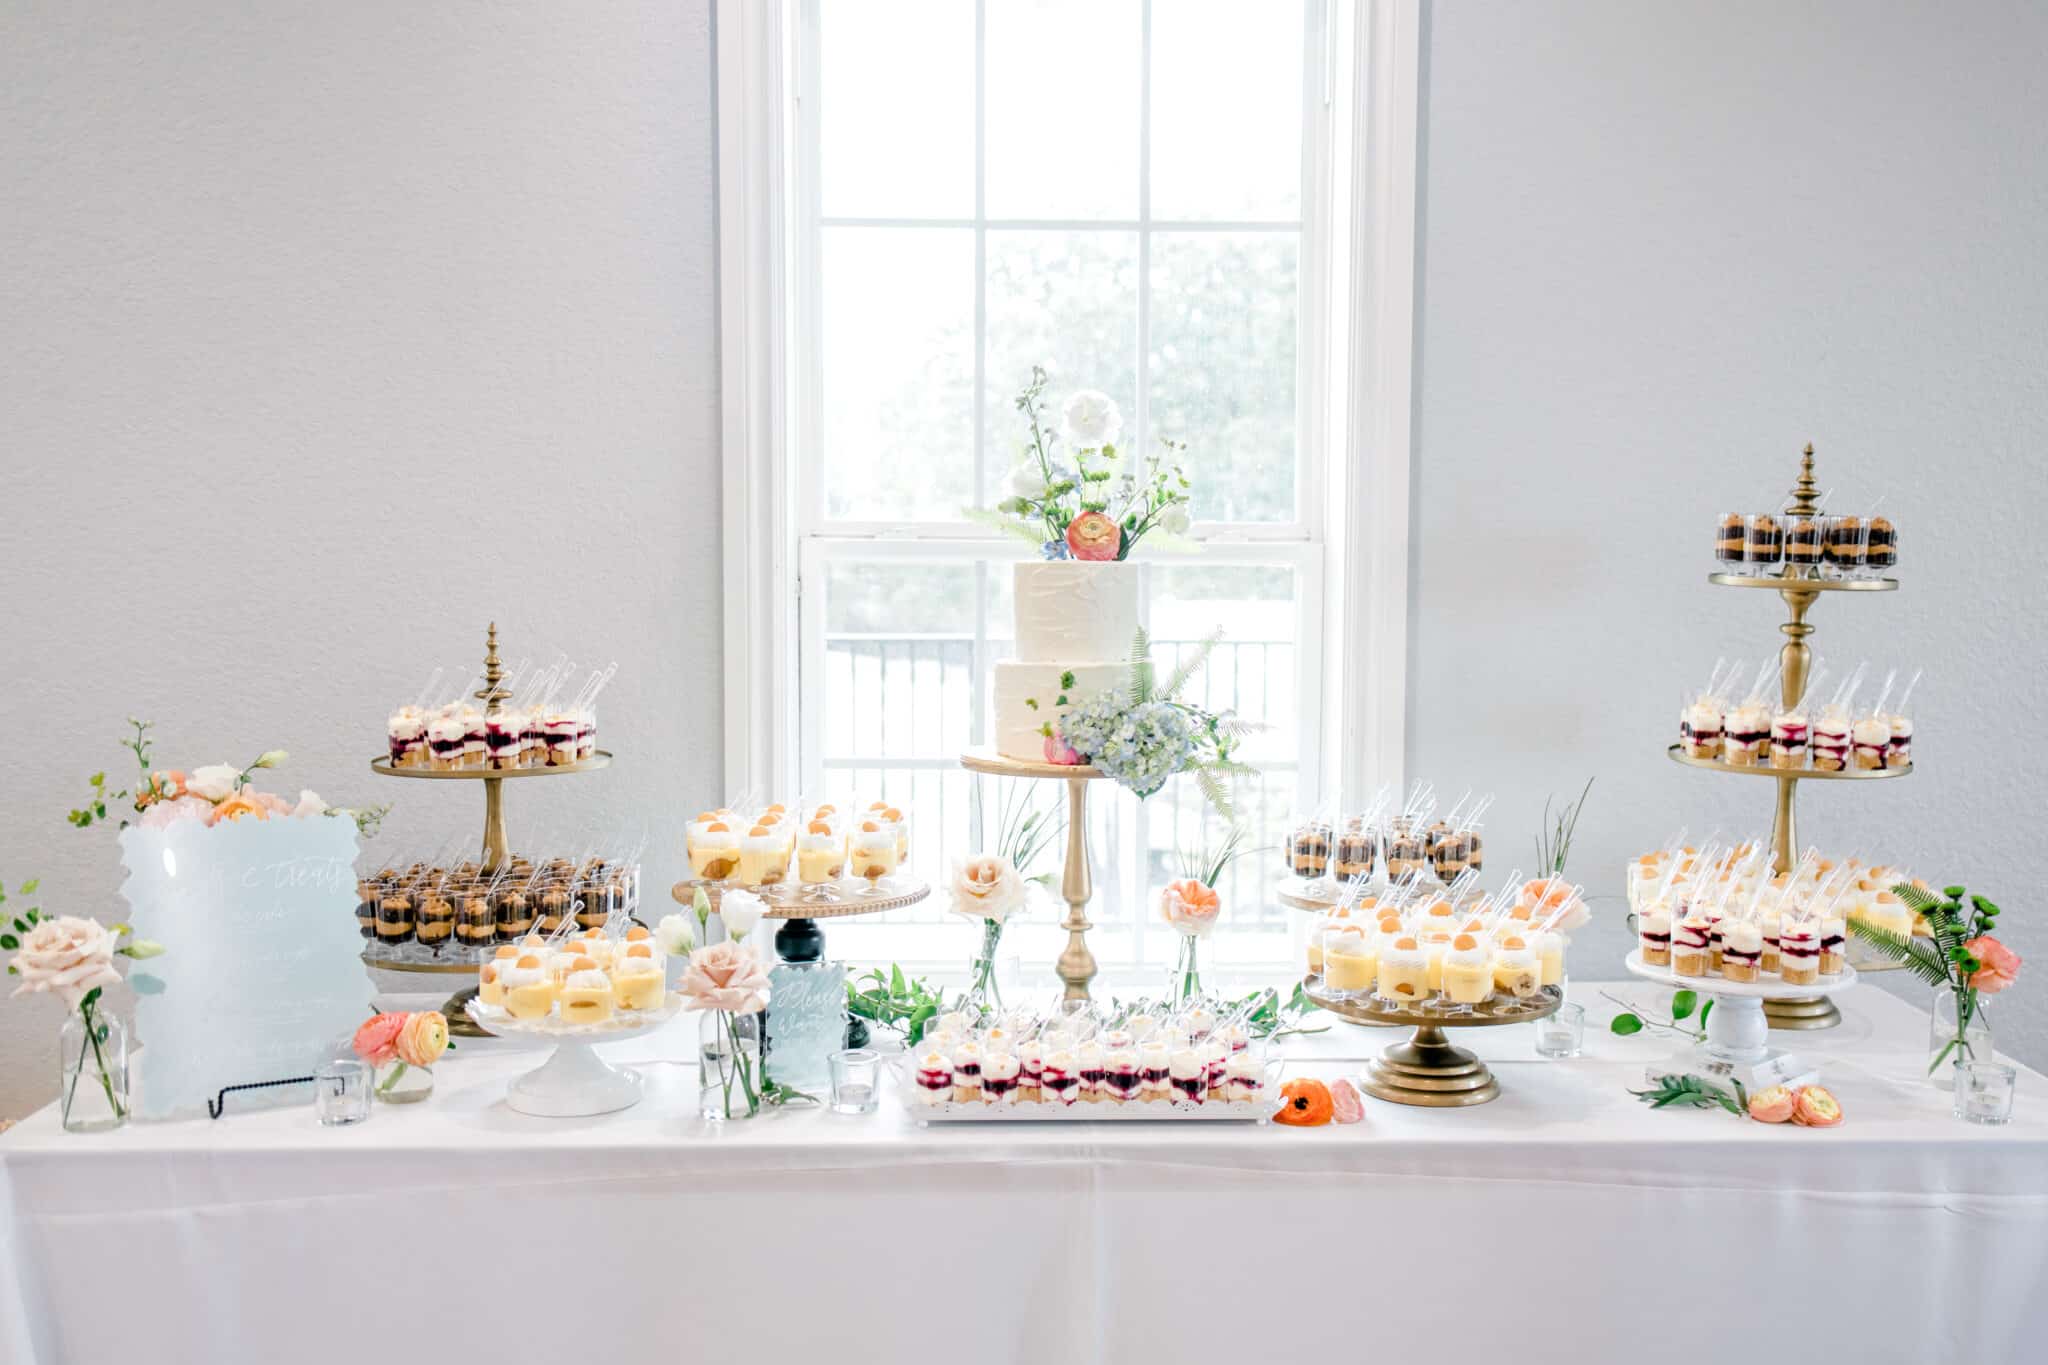 wedding dessert table covered in sweets